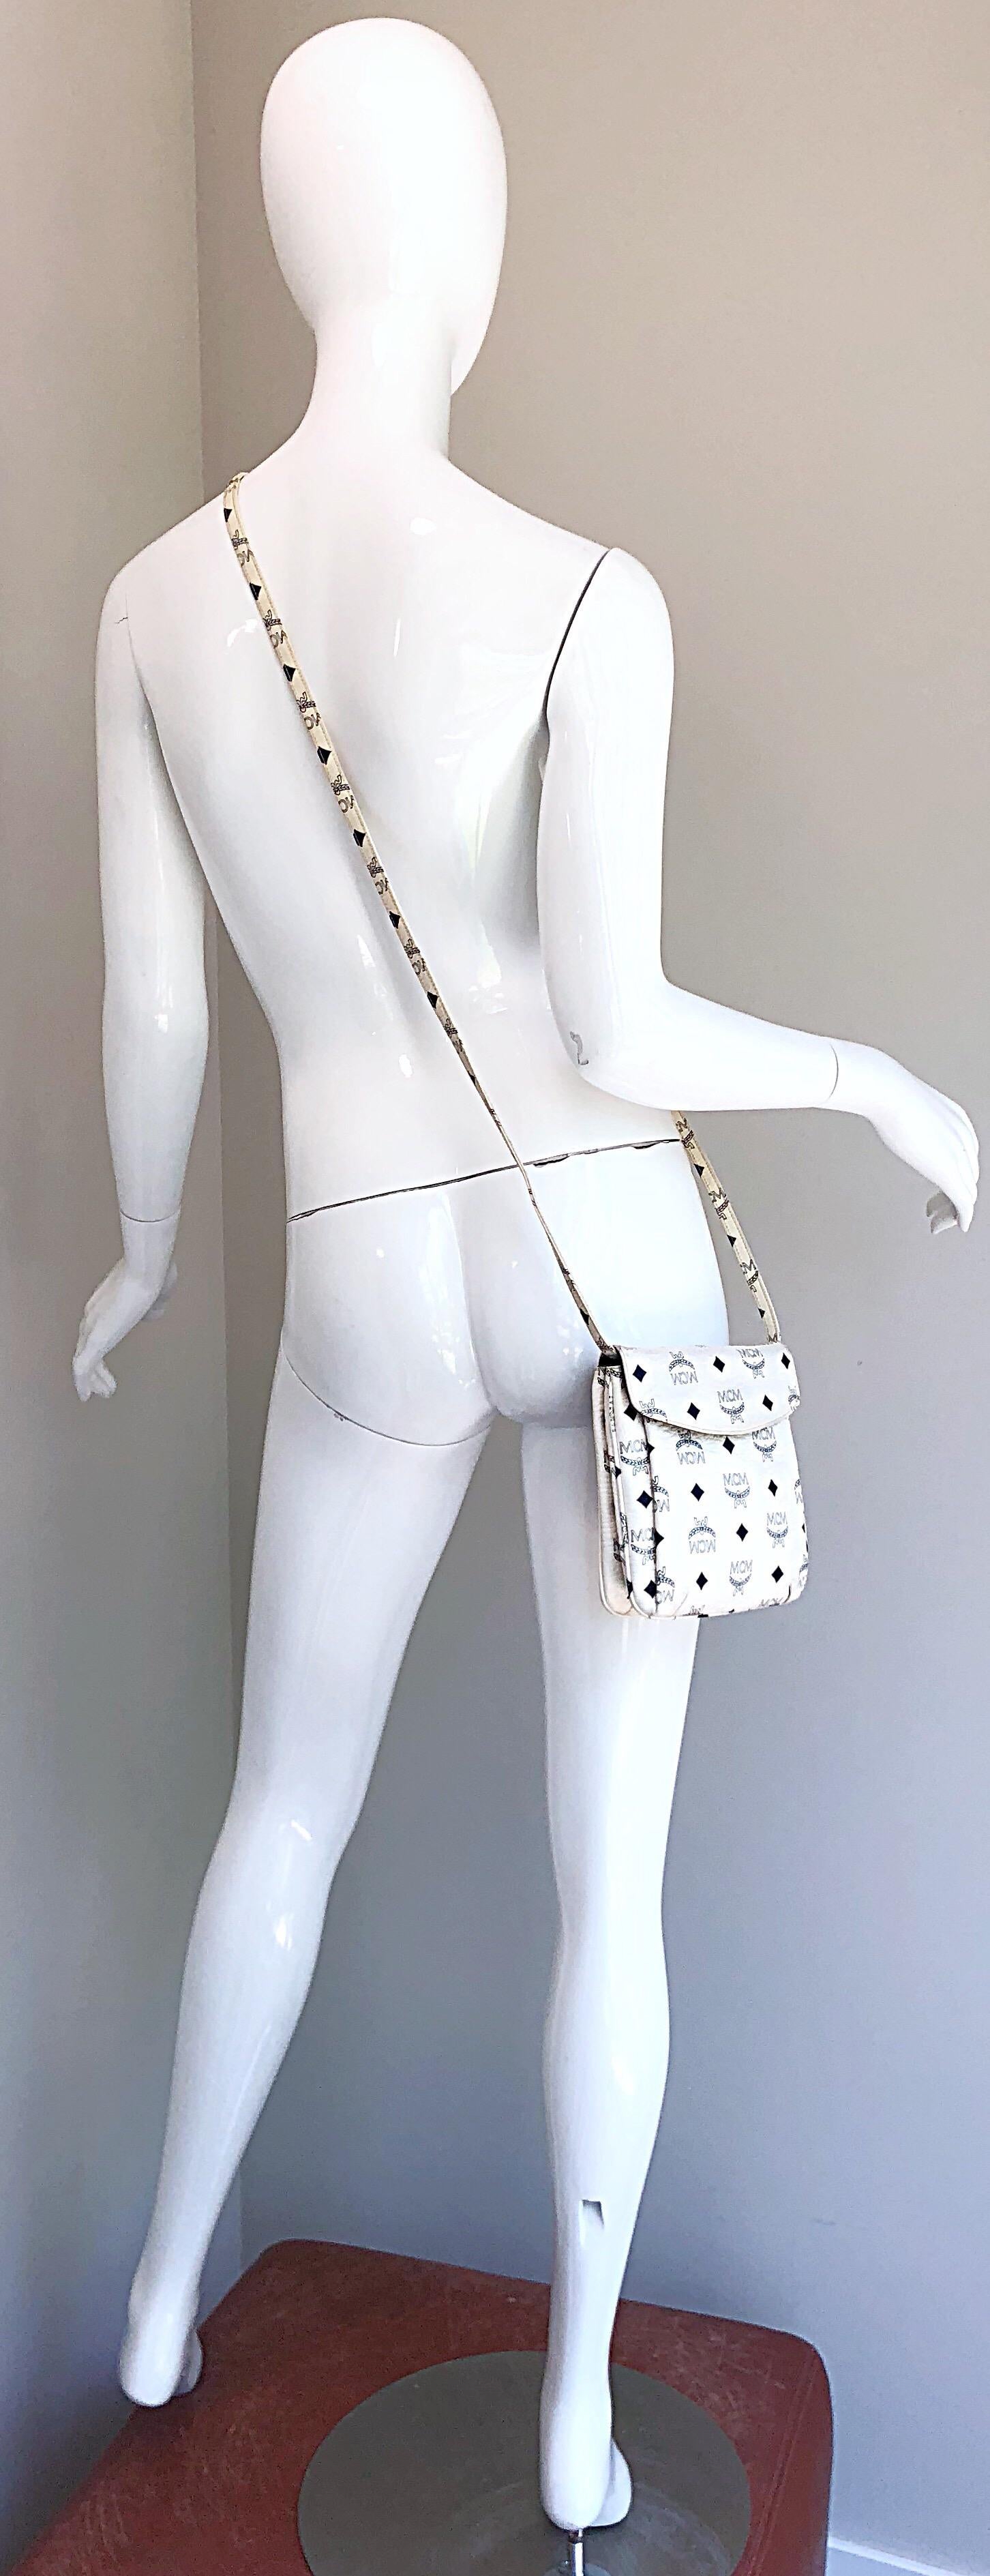 Awesome vintage MCM original, by Michael Cromer, unisex 1970s black and white logo encrusted small cross body bag, OR clutch ! Features all the necessary pockets and secure closure that make this rare gem perfect for traveling. Adjustable strap can